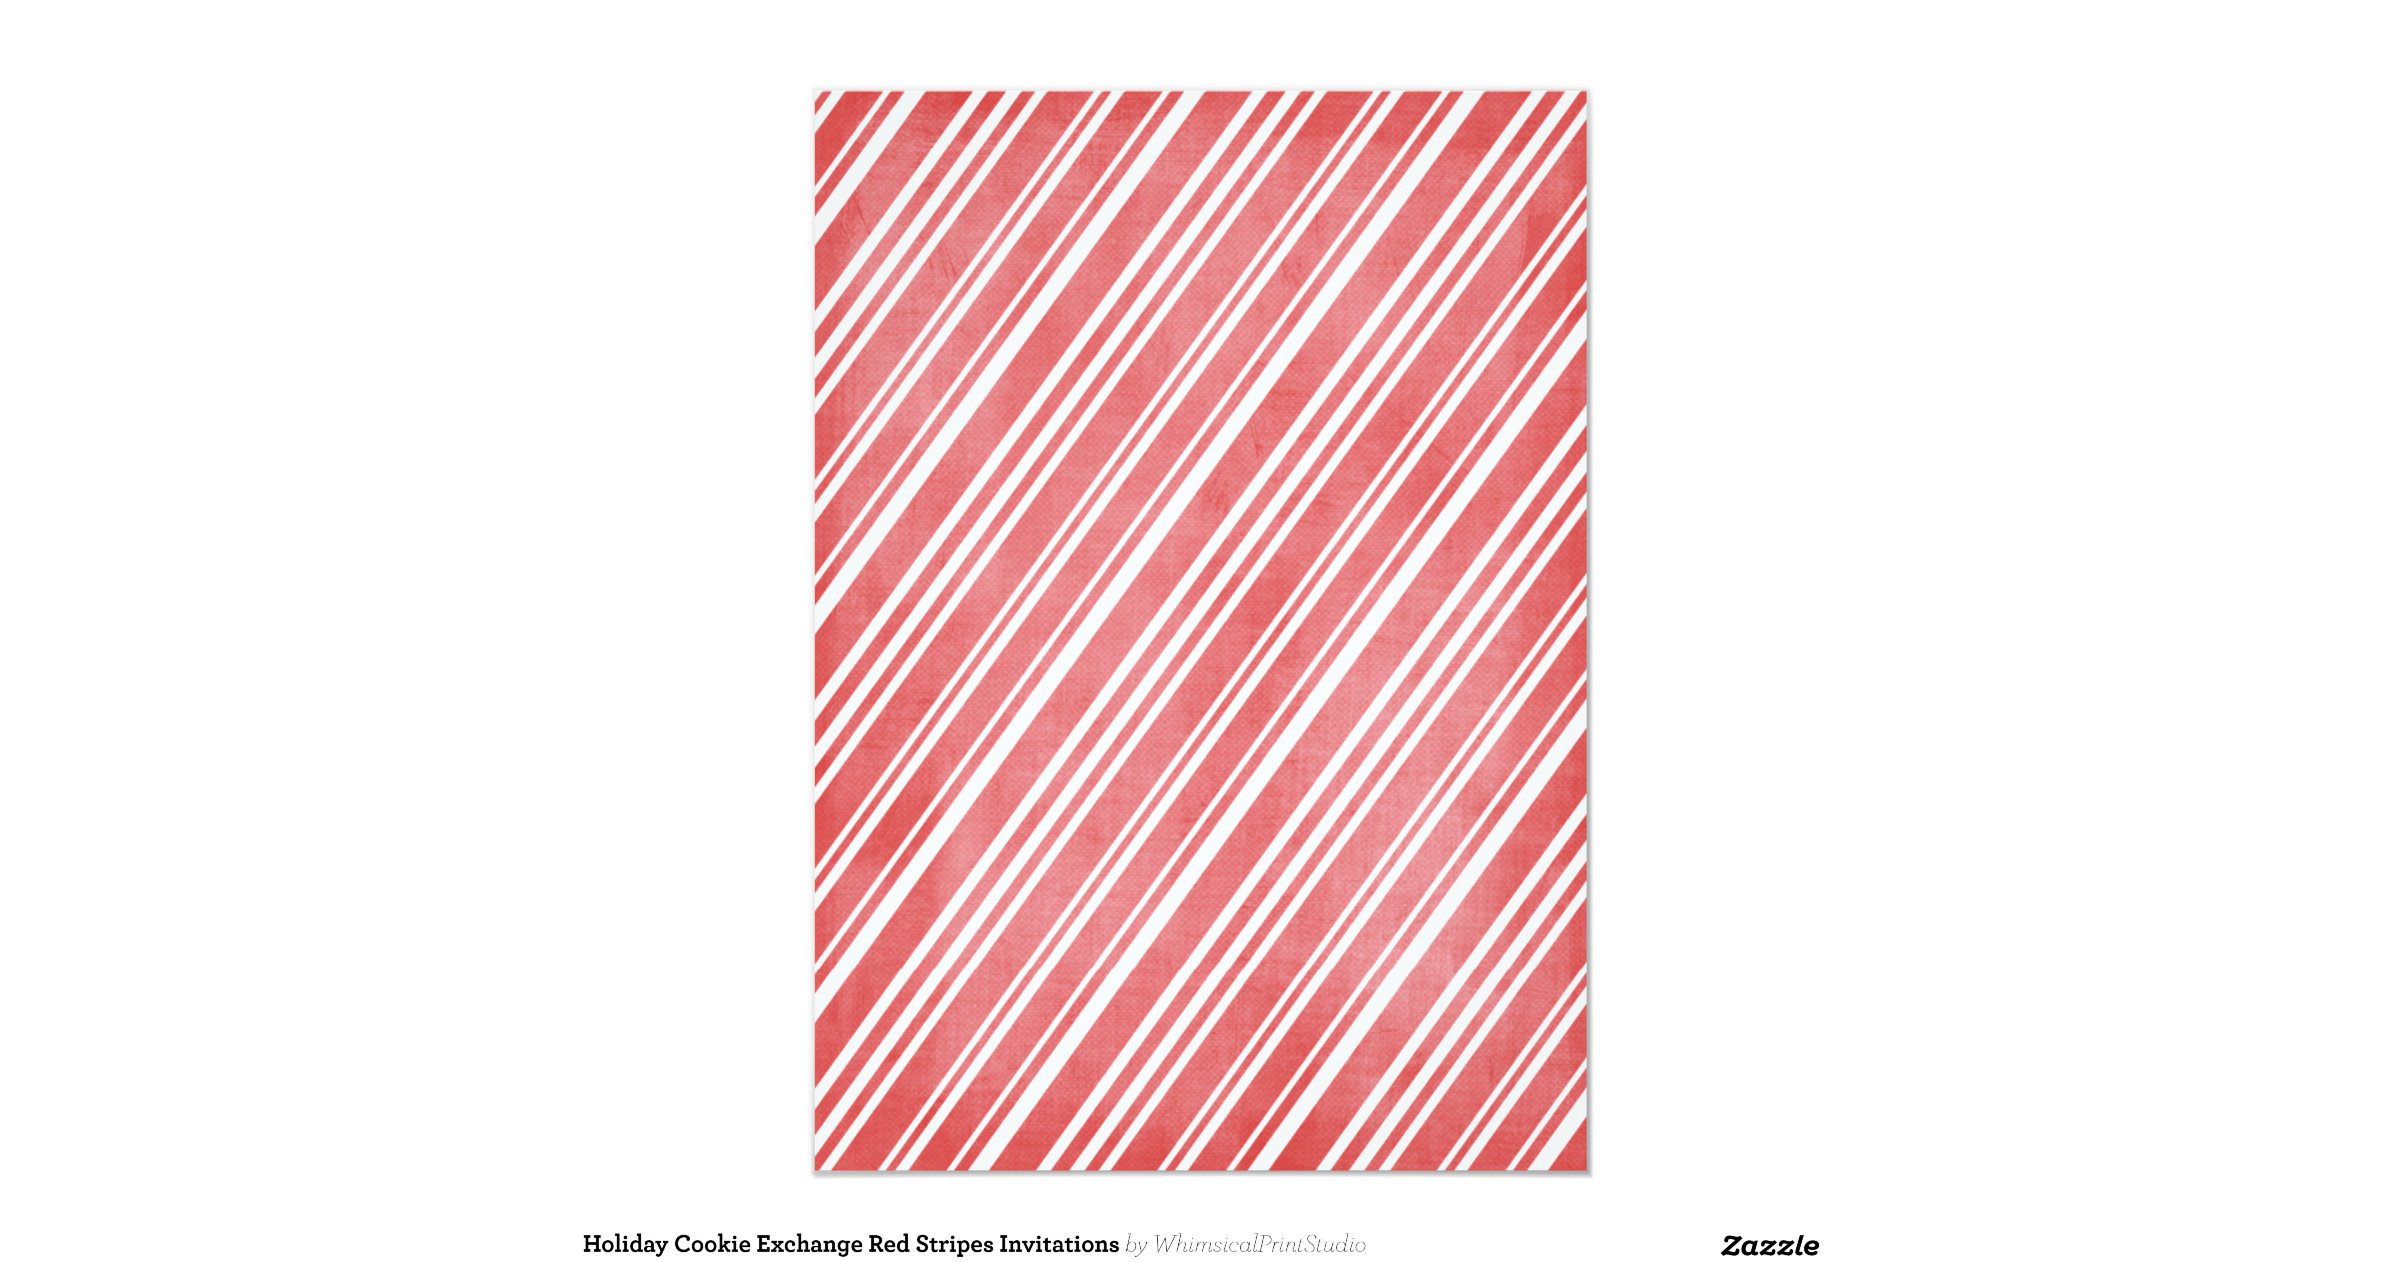 holiday_cookie_exchange_red_stripes_invitations ...